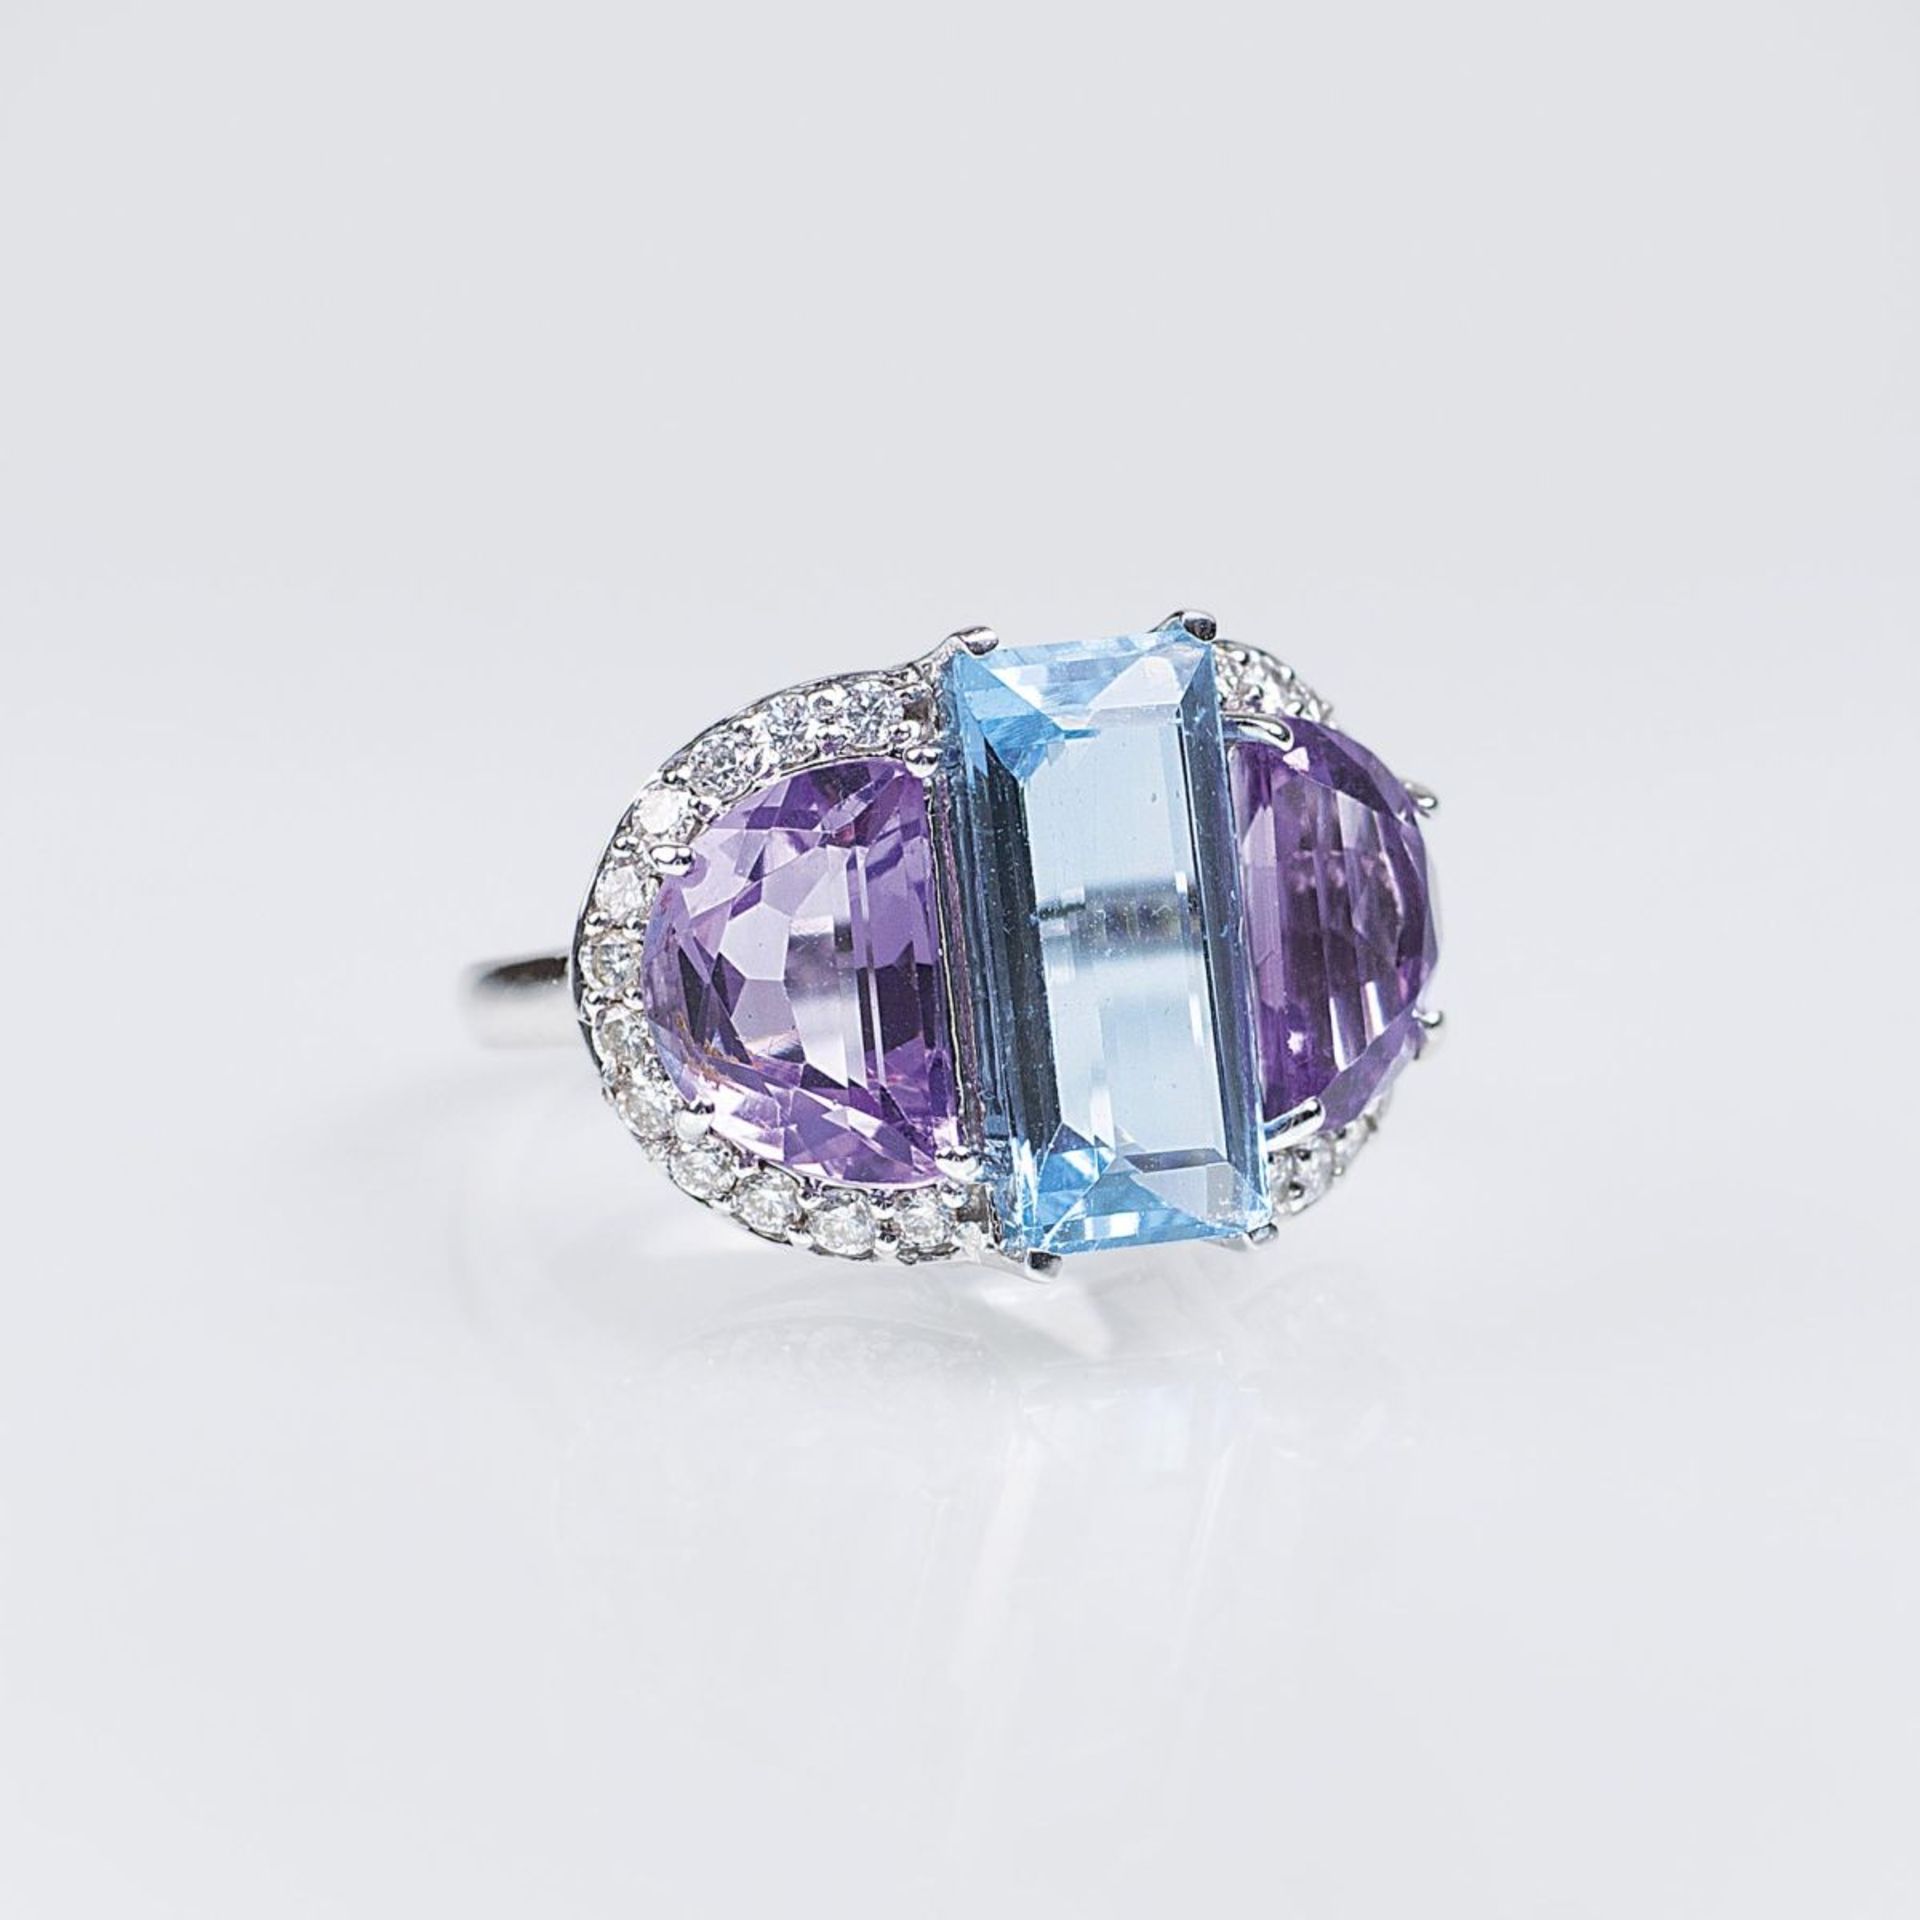 An Aquamarine Amethyst Ring14 ct. white gold. In front one aquamarine in step cut approx. 2,22